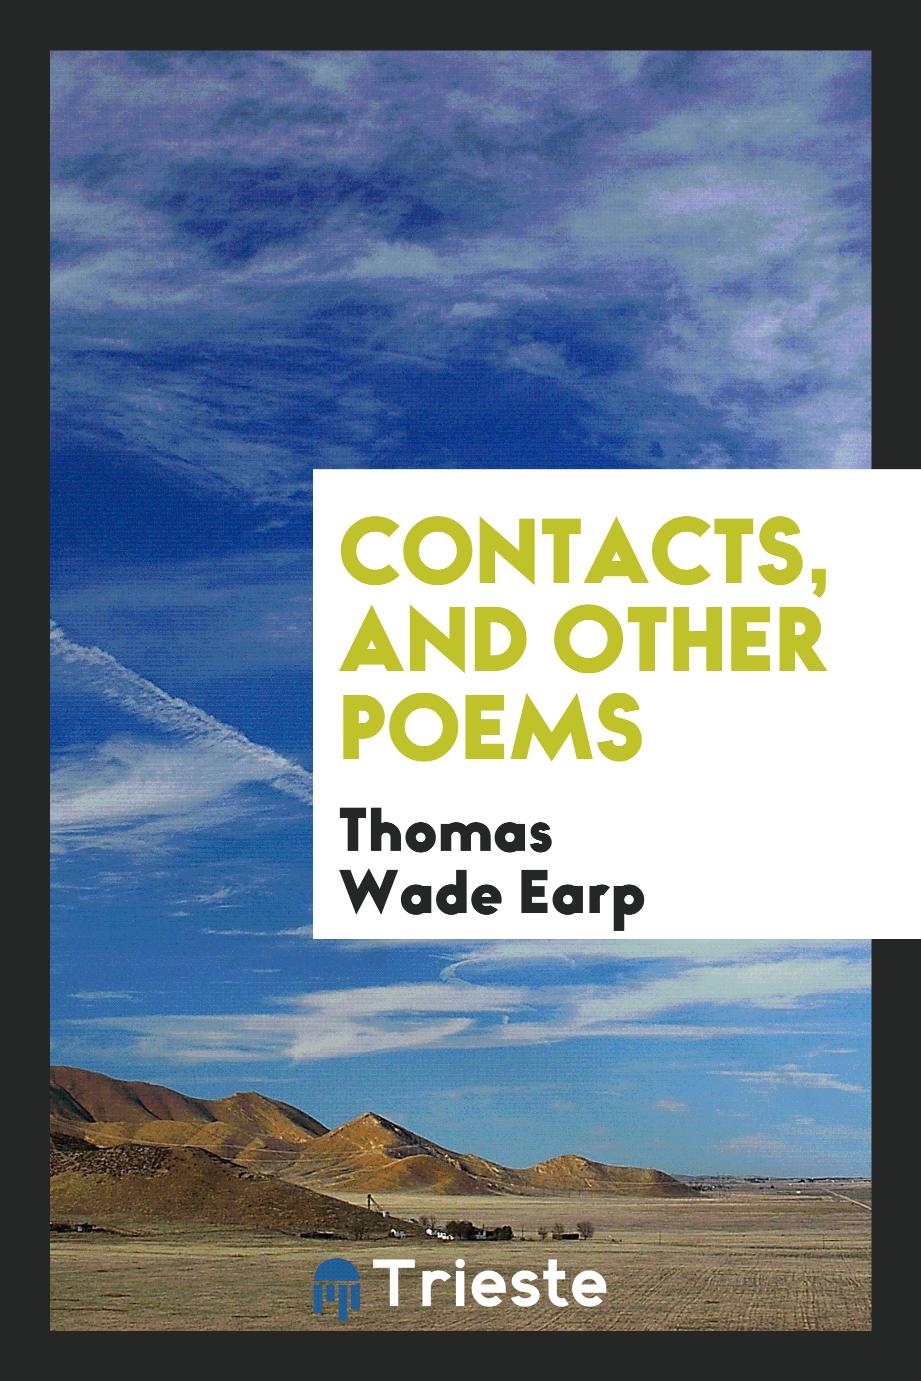 Contacts, and other poems